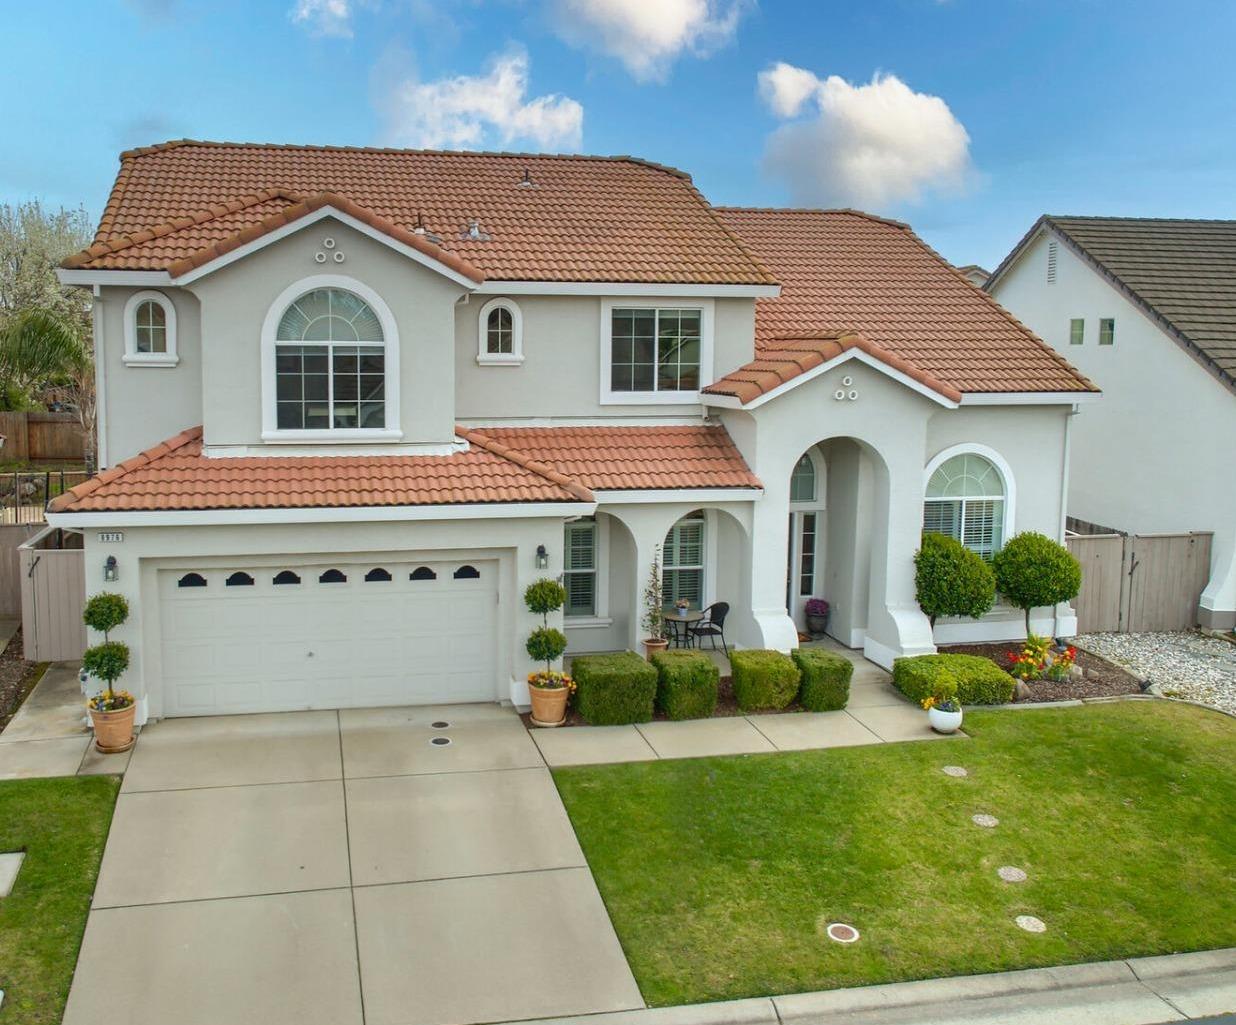 Photo of 8976 Water Song Cir in Roseville, CA